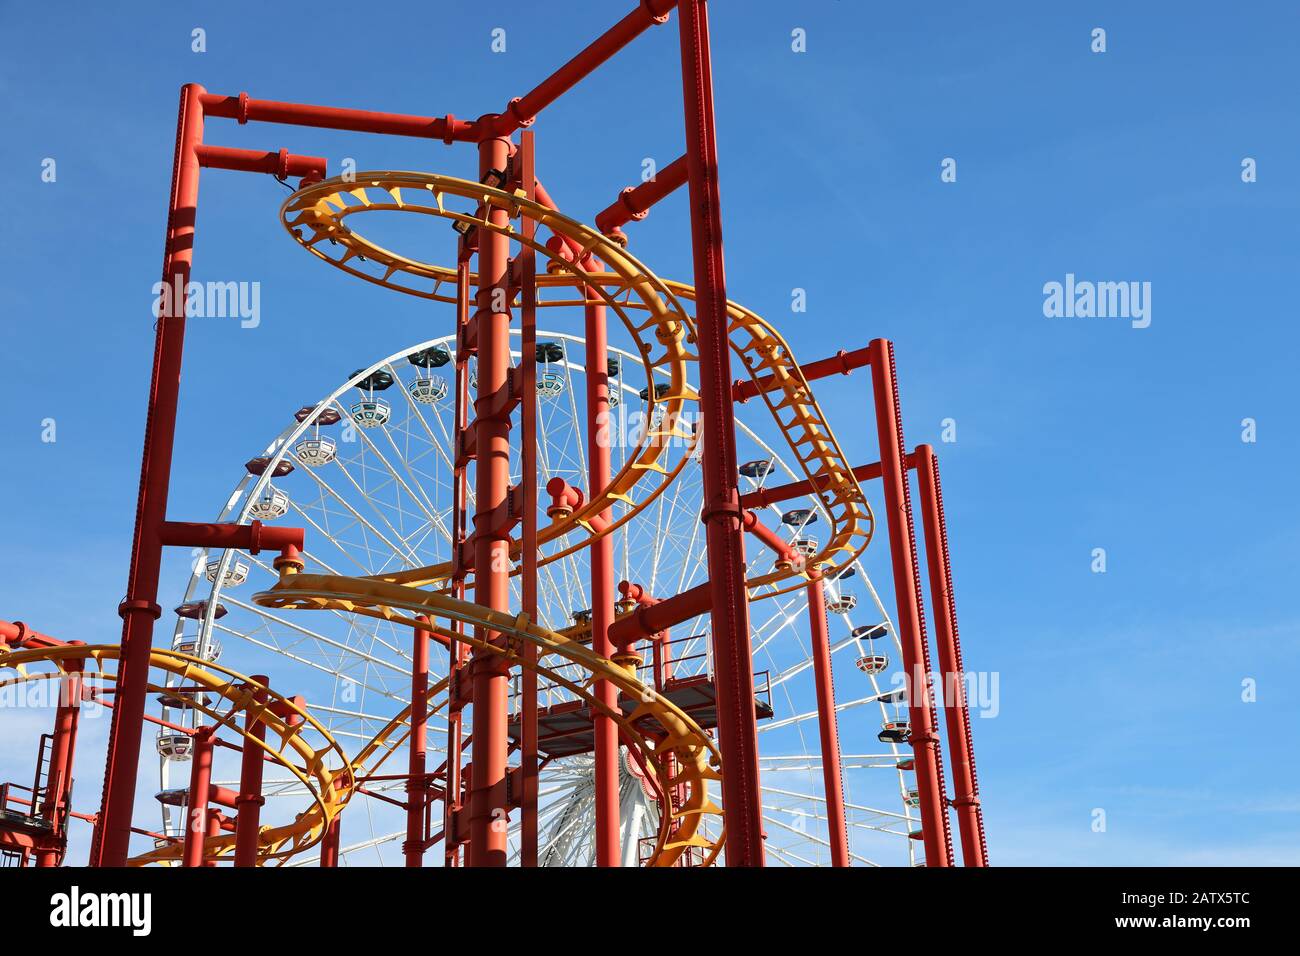 Rollercoaster with ferris weel in the background at Prater amusement park, Vienna Stock Photo